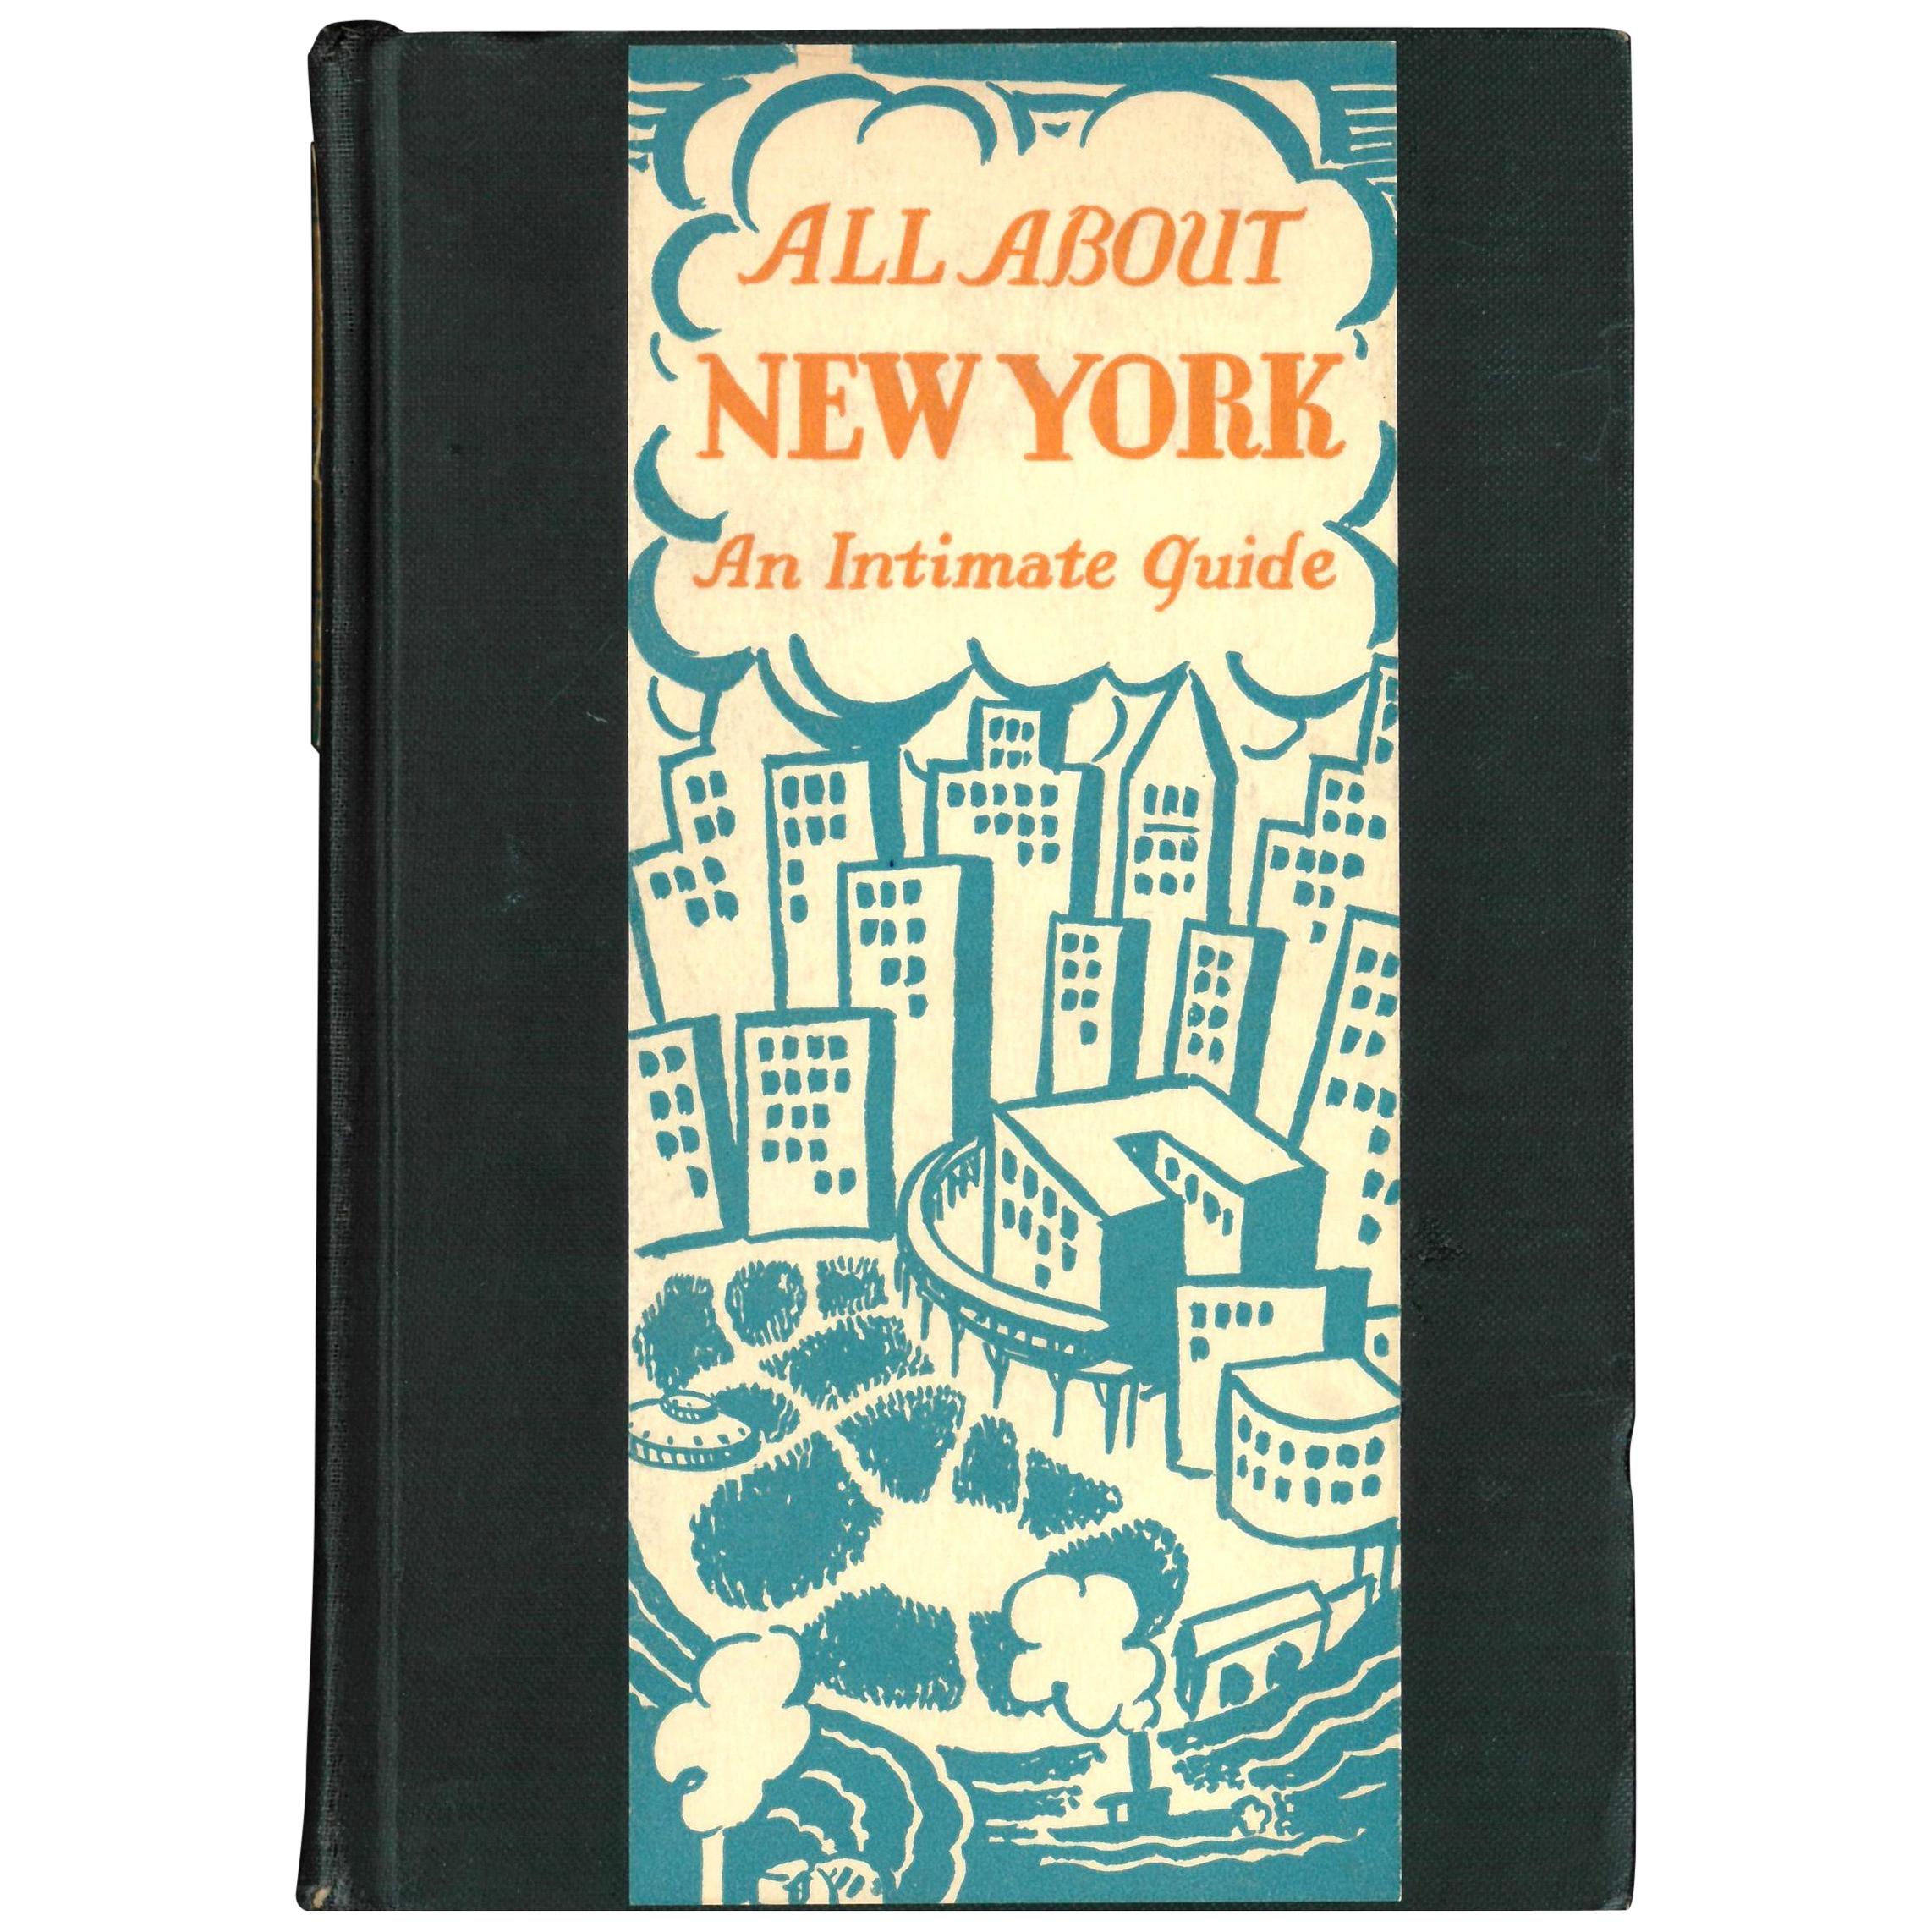 All About New York: An Intimate Guide by Rian James (Book) For Sale